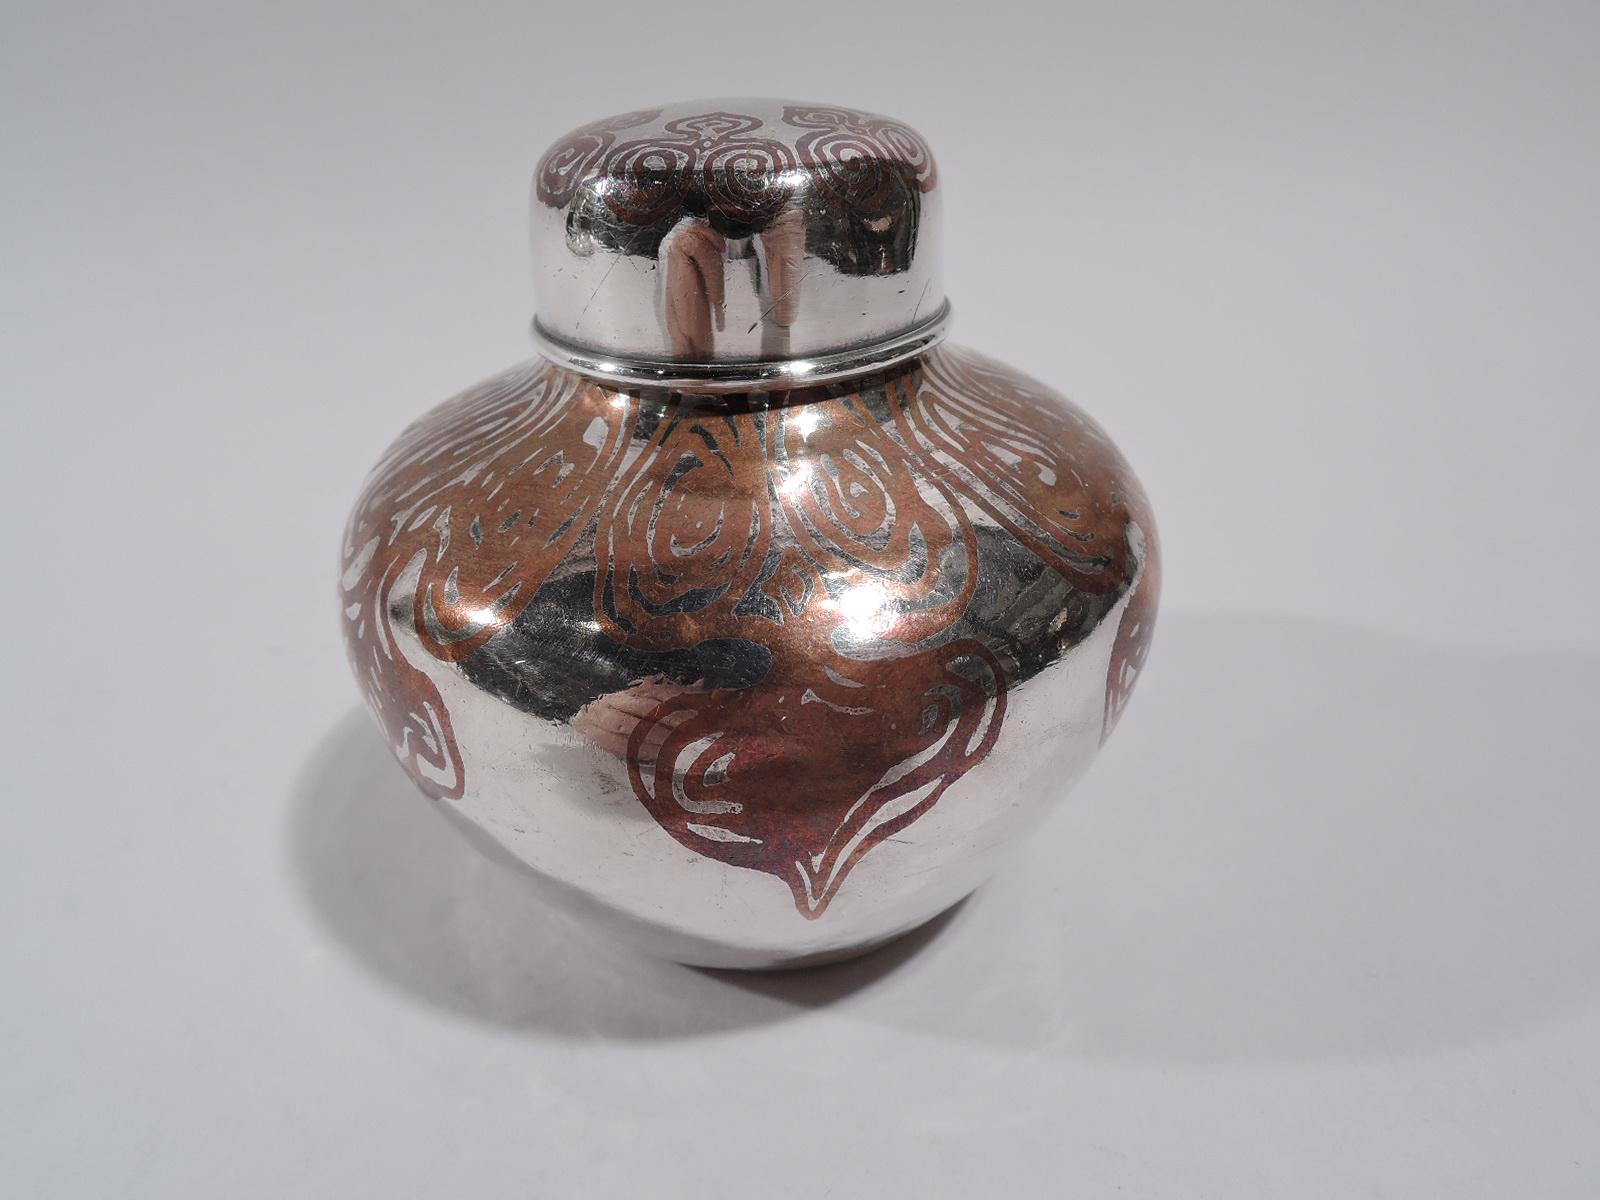 Exotic mixed metal tea caddy. Made by Tiffany & Co. in New York, circa 1910. Sterling silver ginger-jar with squat and tapering sides, short neck, and snug-fitting cover. Copper ornament with irregular scrollwork. Fully marked including pattern no.